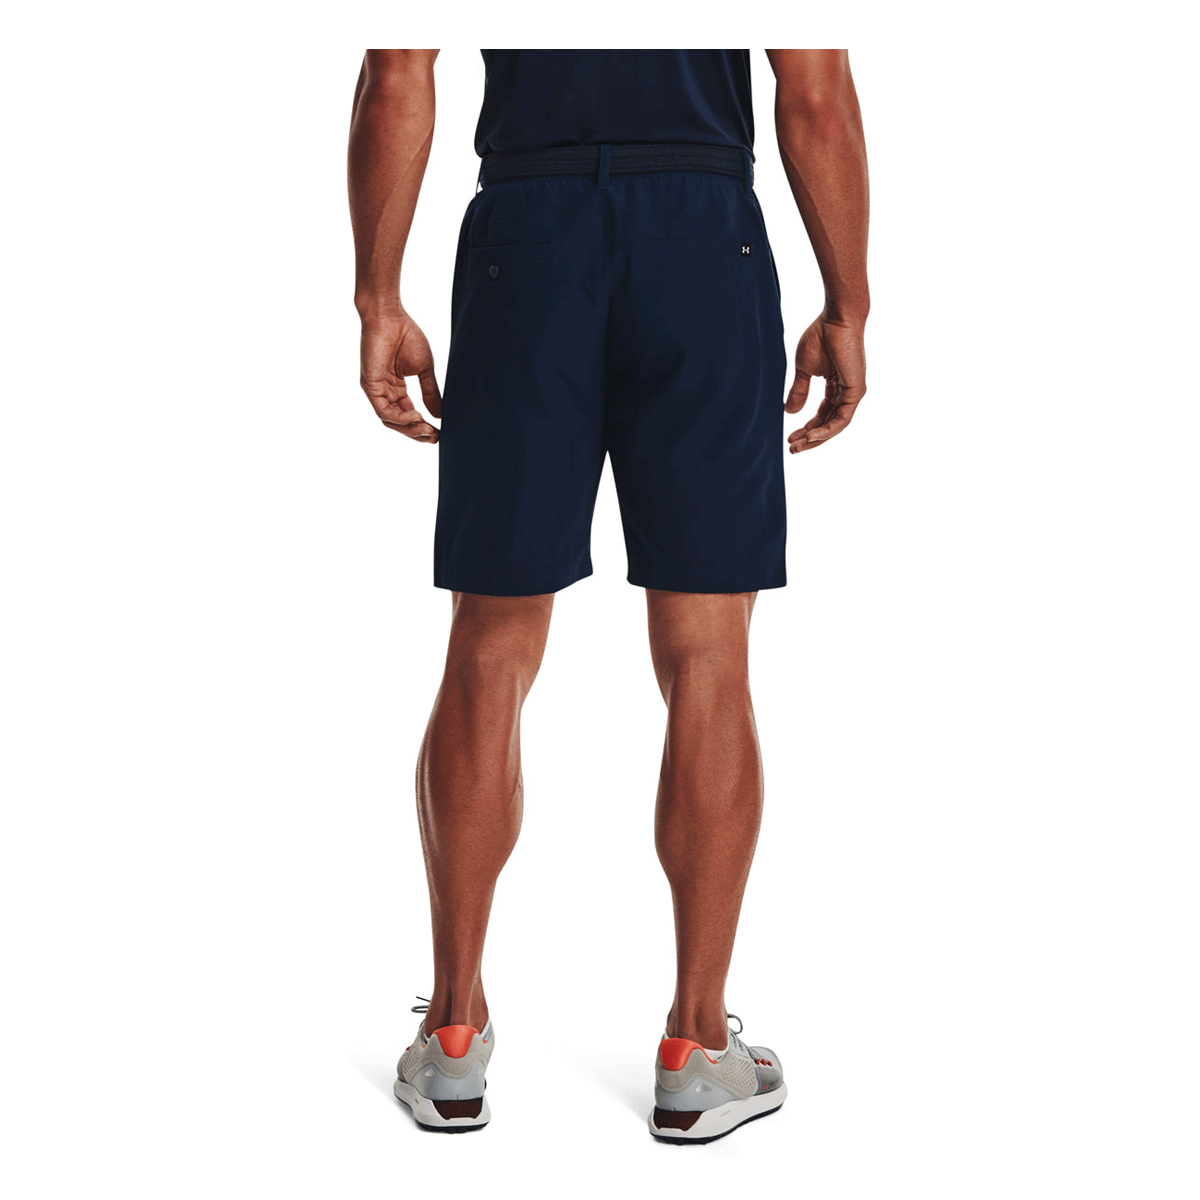 Under Armour Shorts Size YLG/14-16 Navy Loose Fit Shorts USA Stars